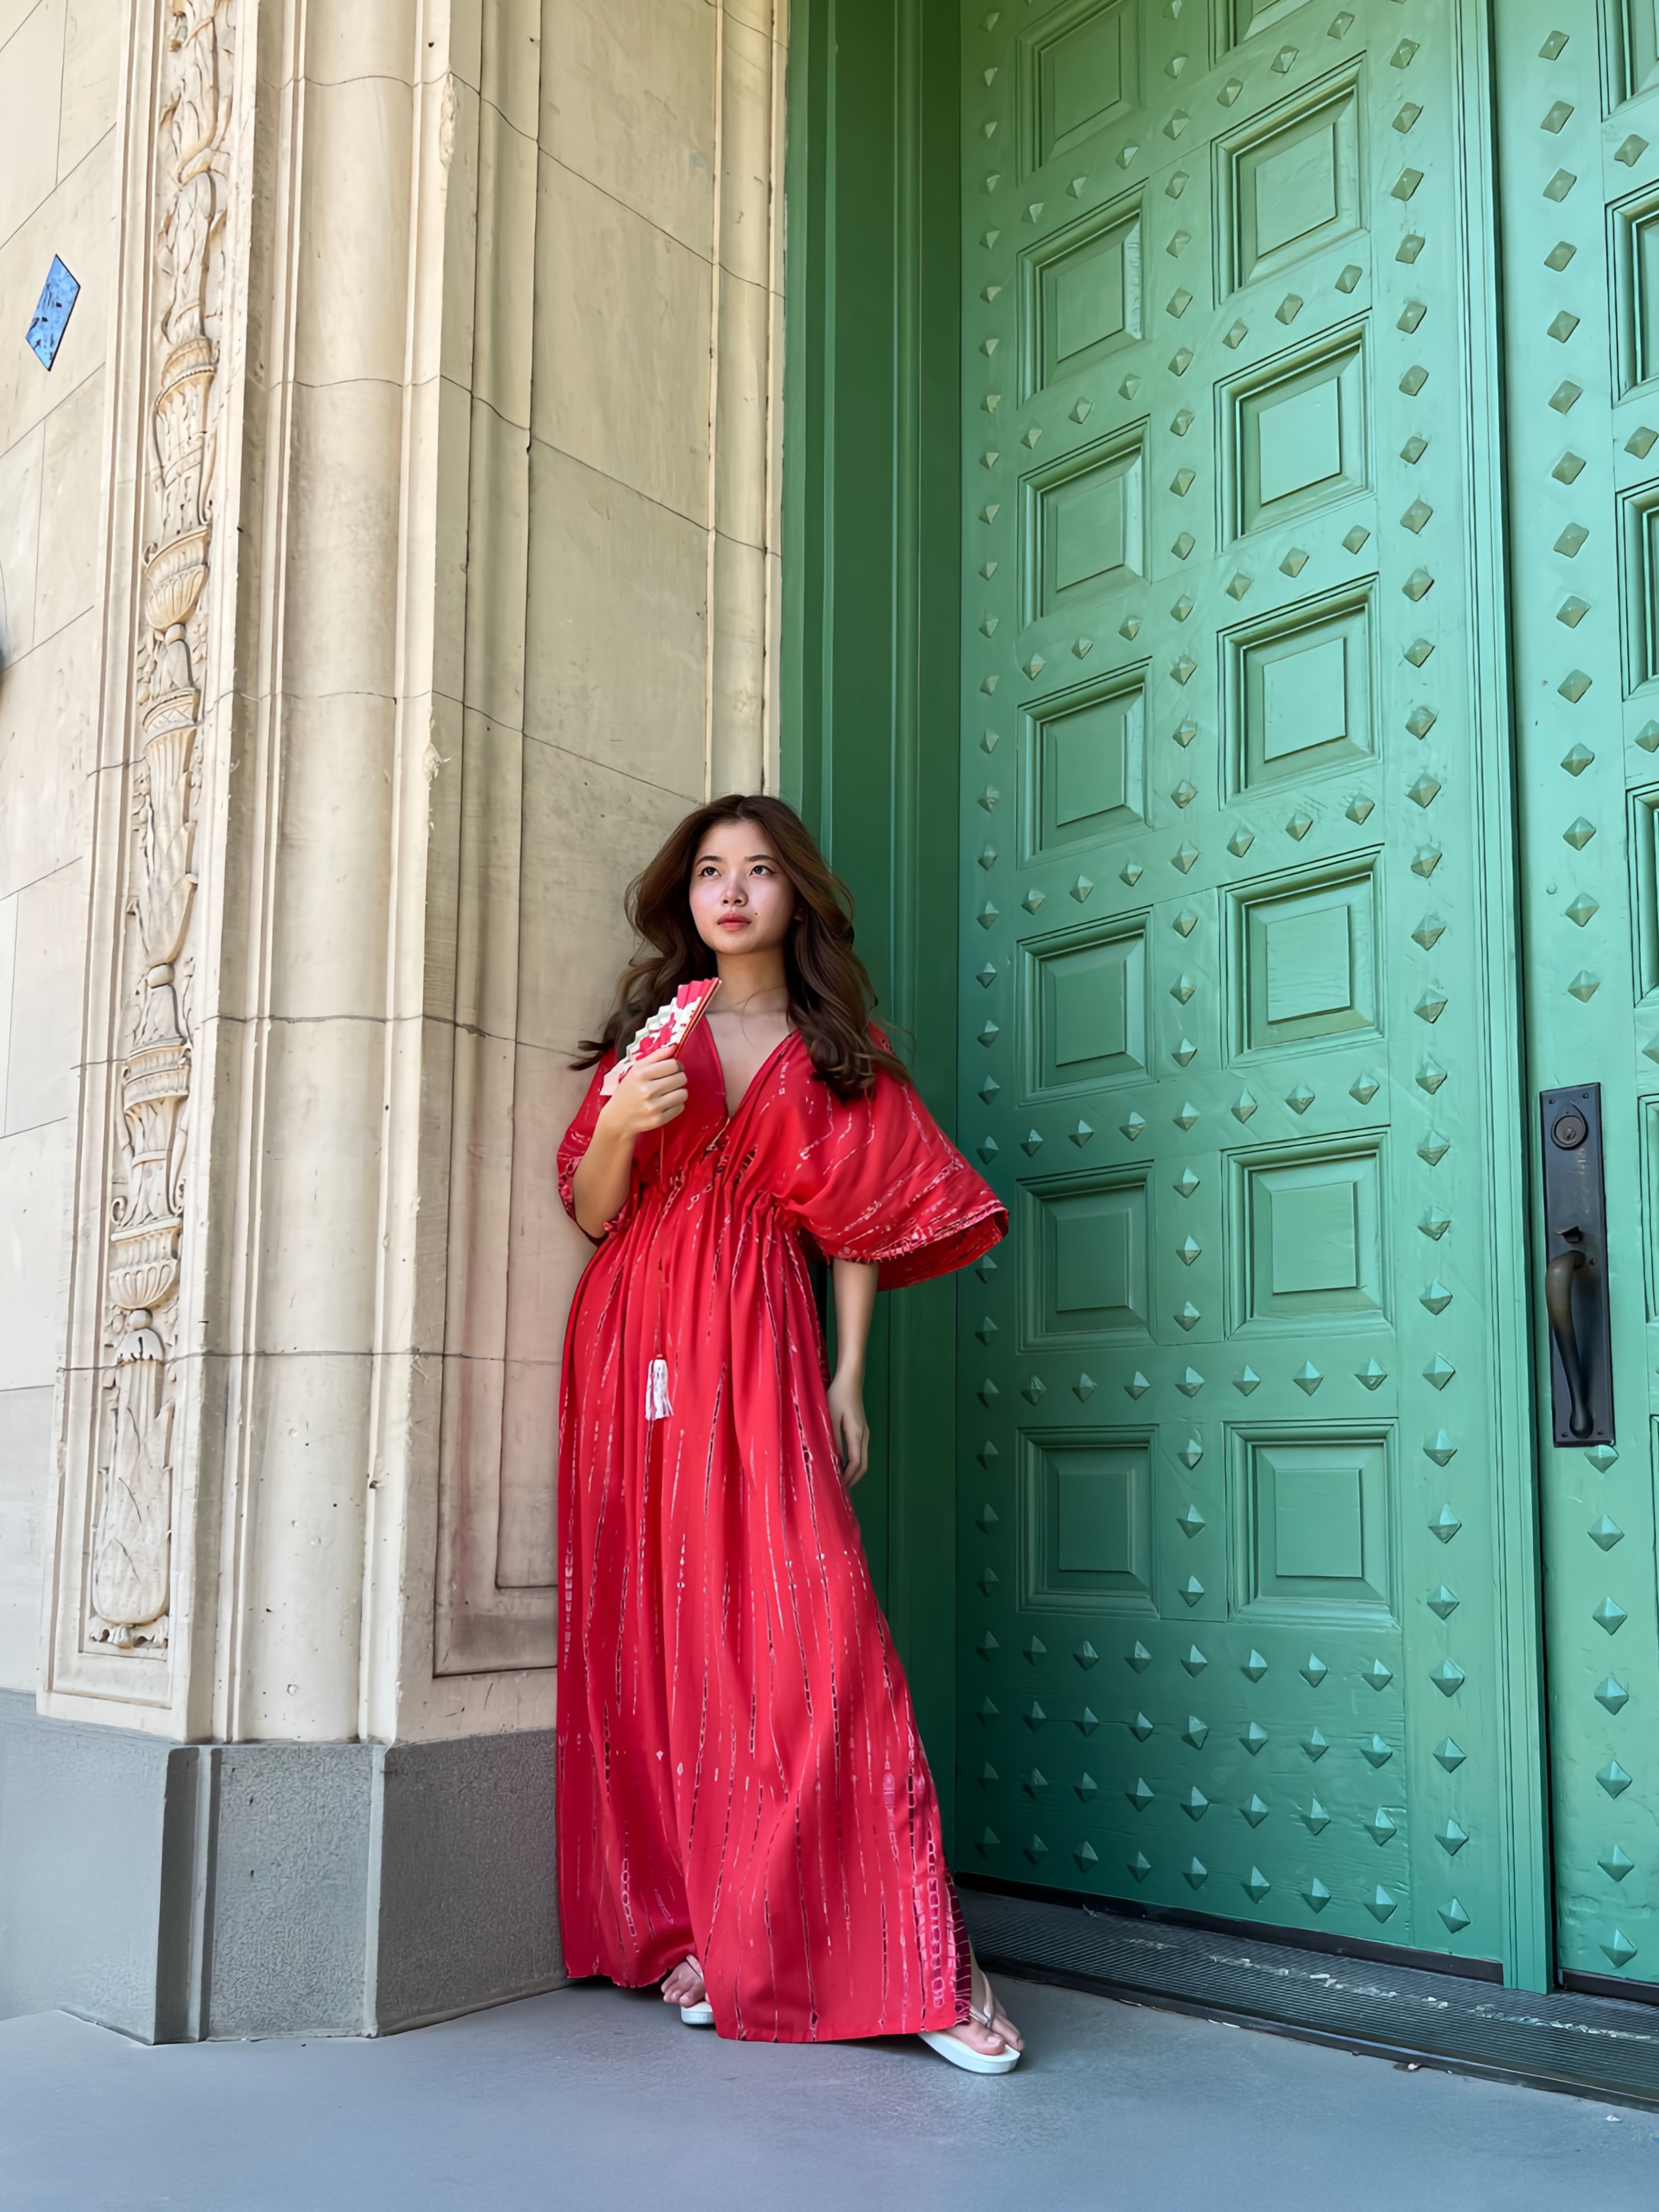 Shop the Red Tie-Dye Kaftan Maxi Dress - Perfect for Any Occasion with Coco de Chjom?